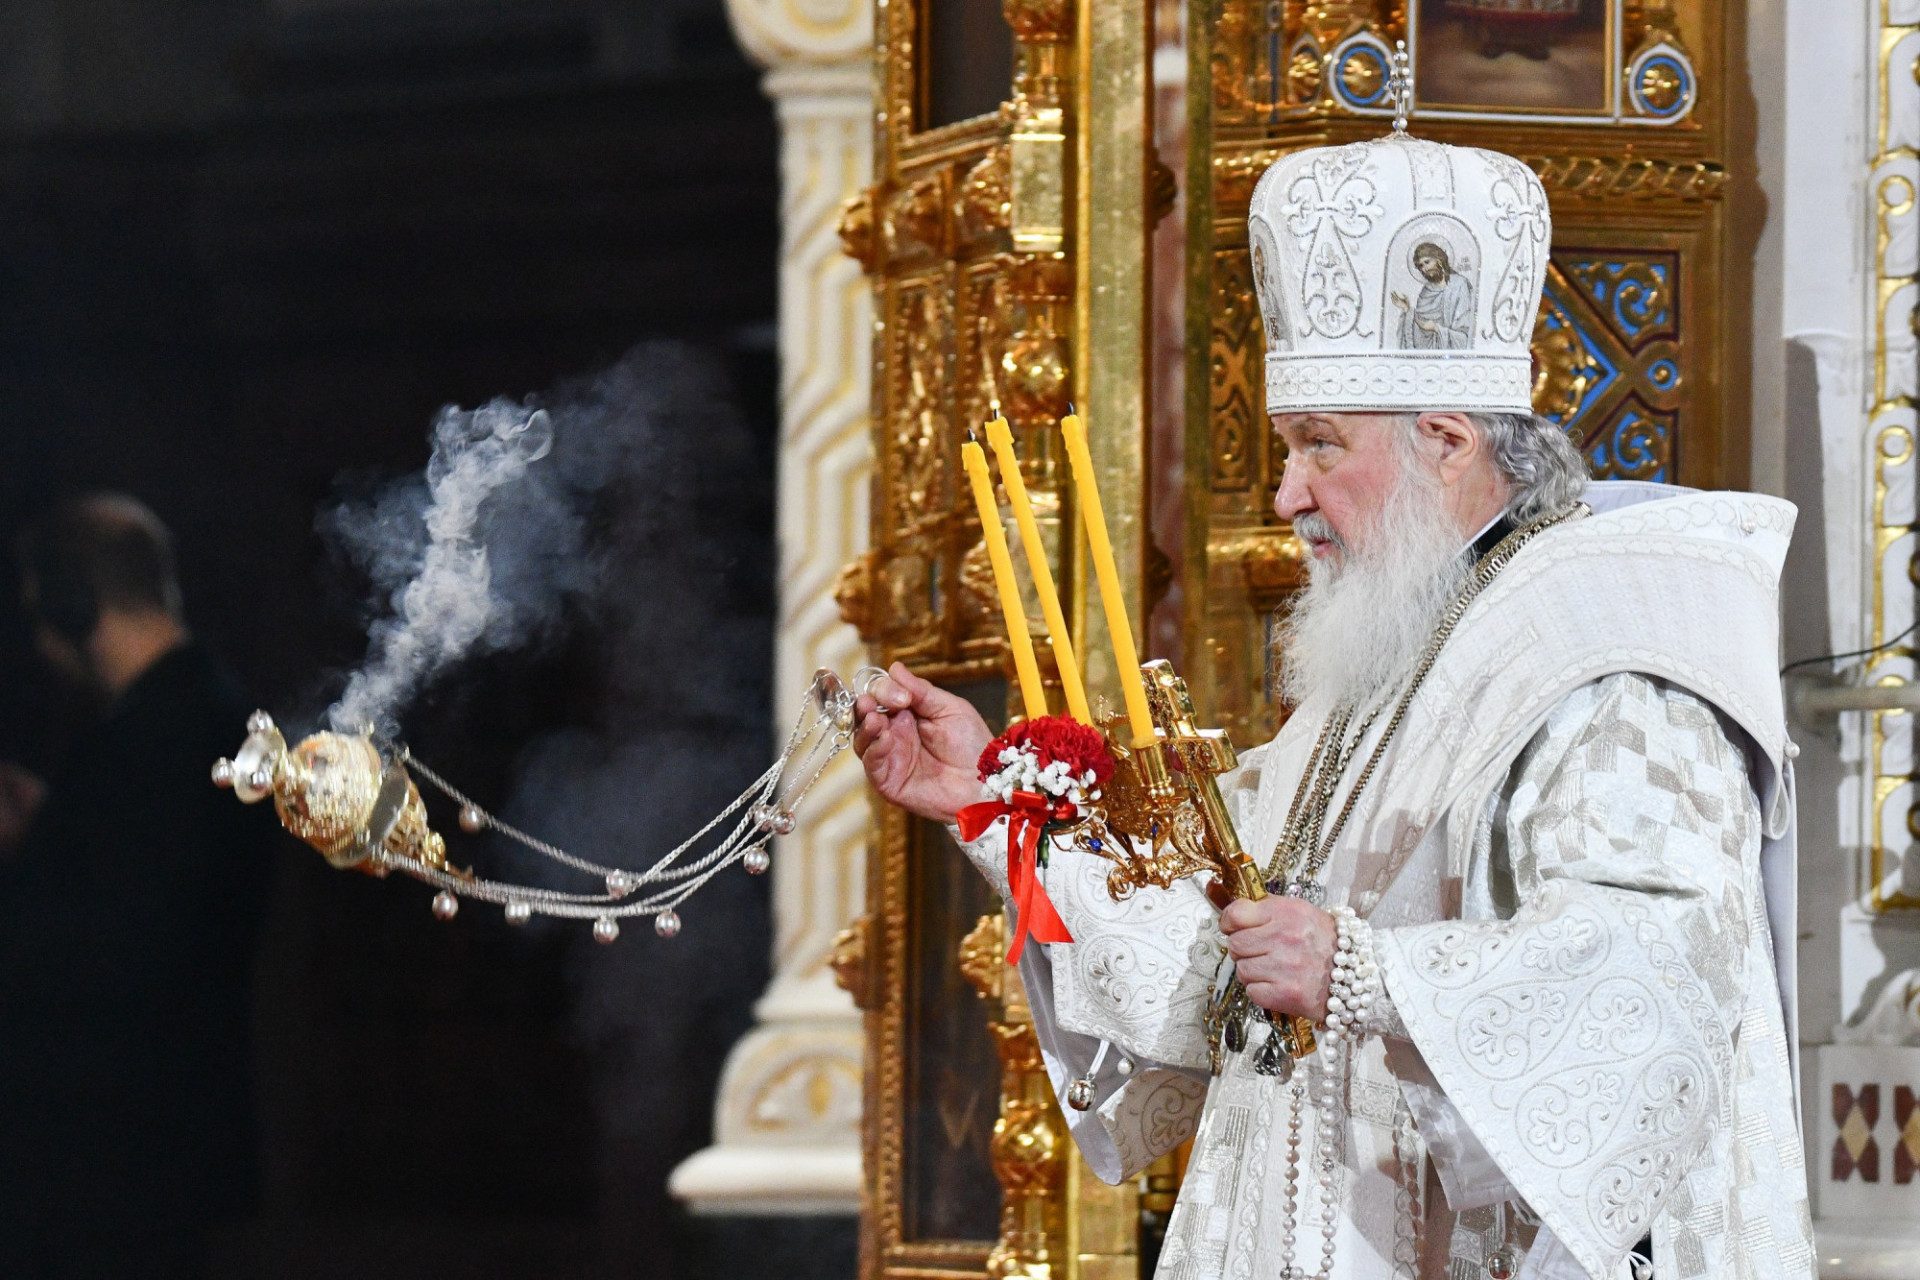 Moscow Celebrates Orthodox Easter The Moscow Times